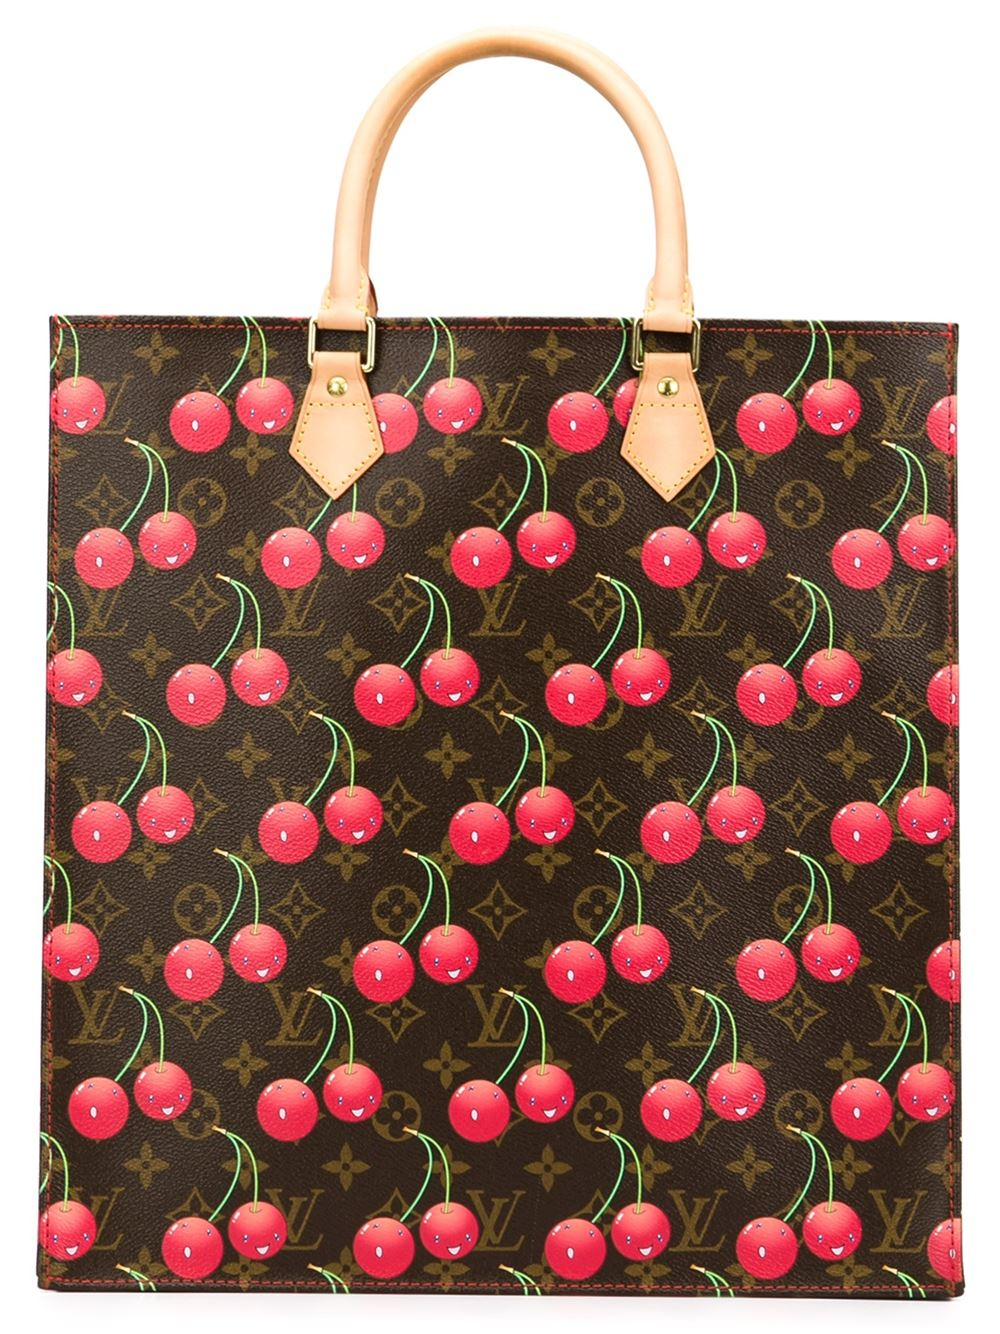 Lyst - Louis Vuitton Cherry Print Tote in Brown